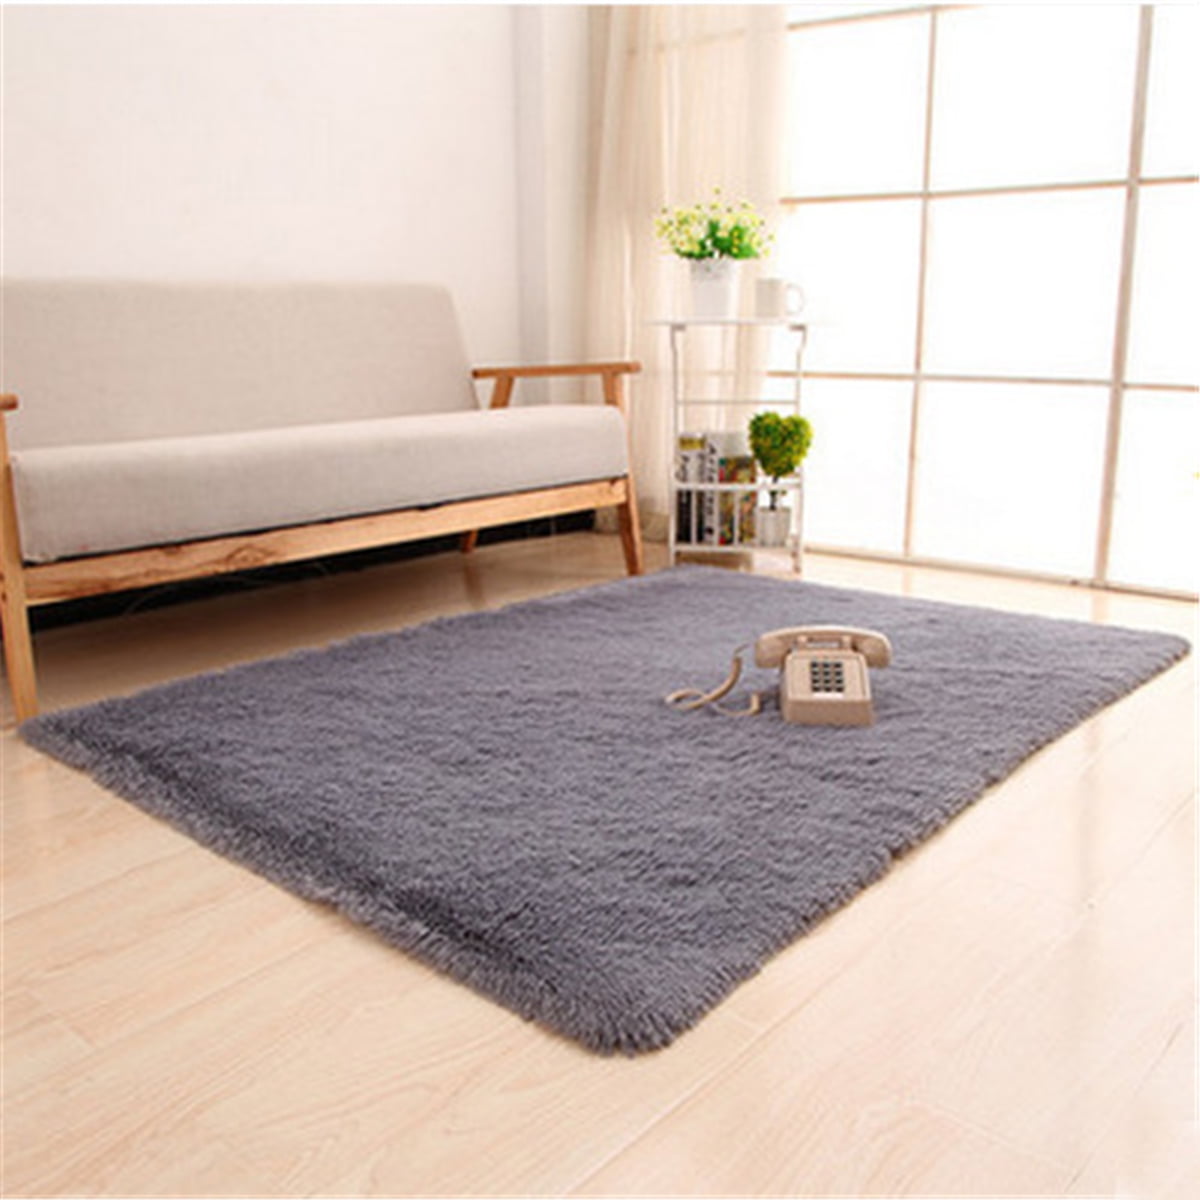 Soft Comfy White Area Rugs for Bedroom Living Room Fluffy